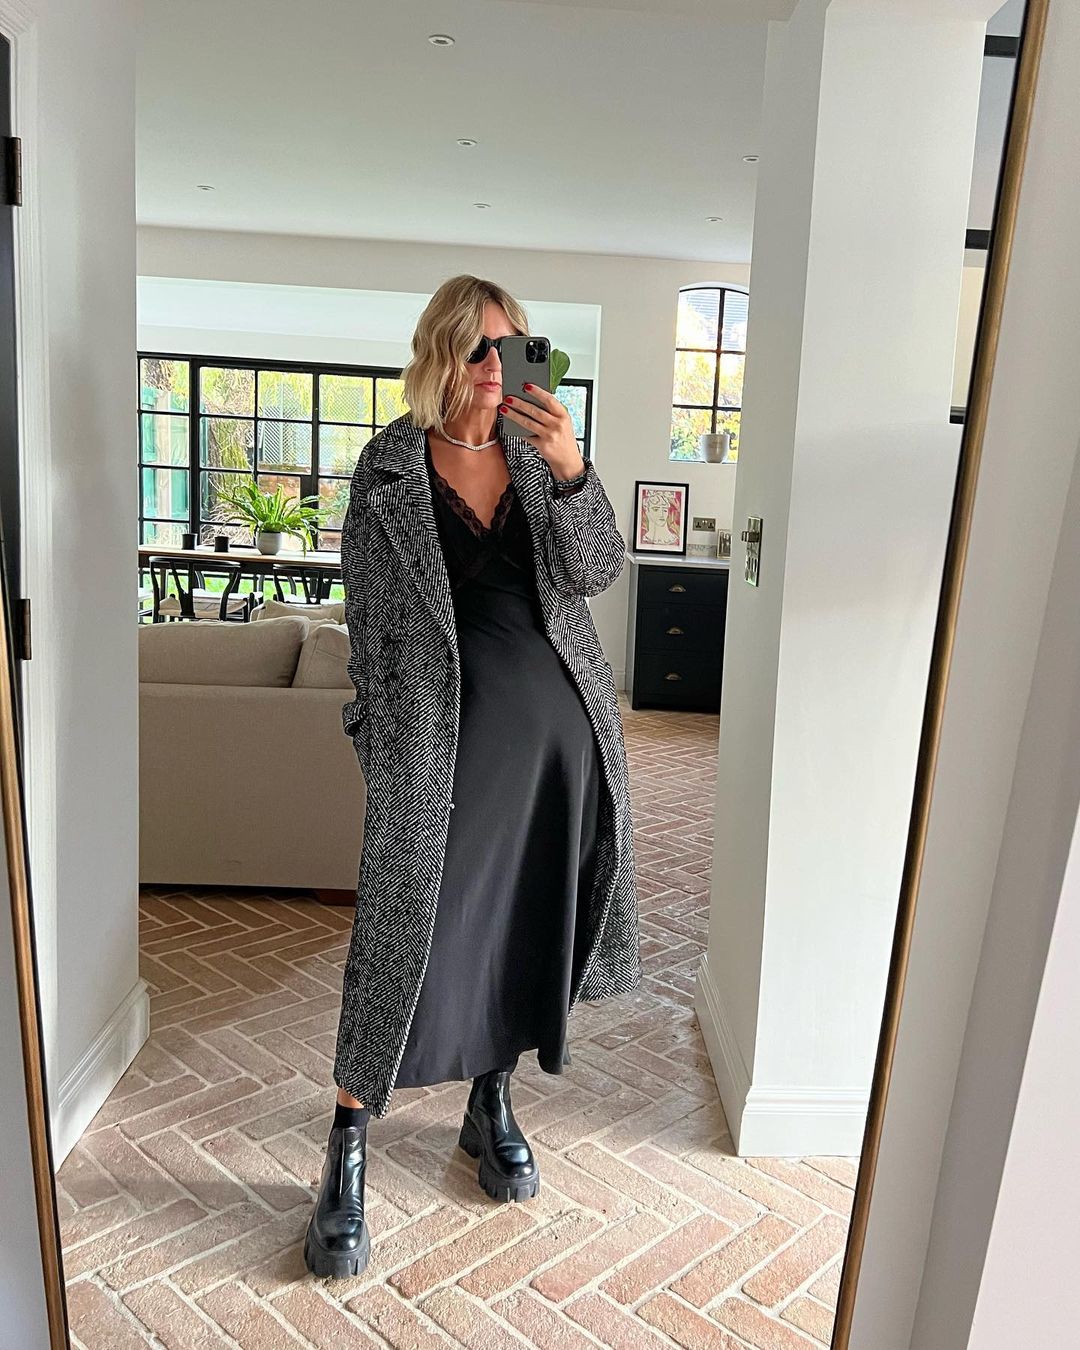 Best boots for women: @emmarosestyle wearing ankle boots with a black dress and long coat